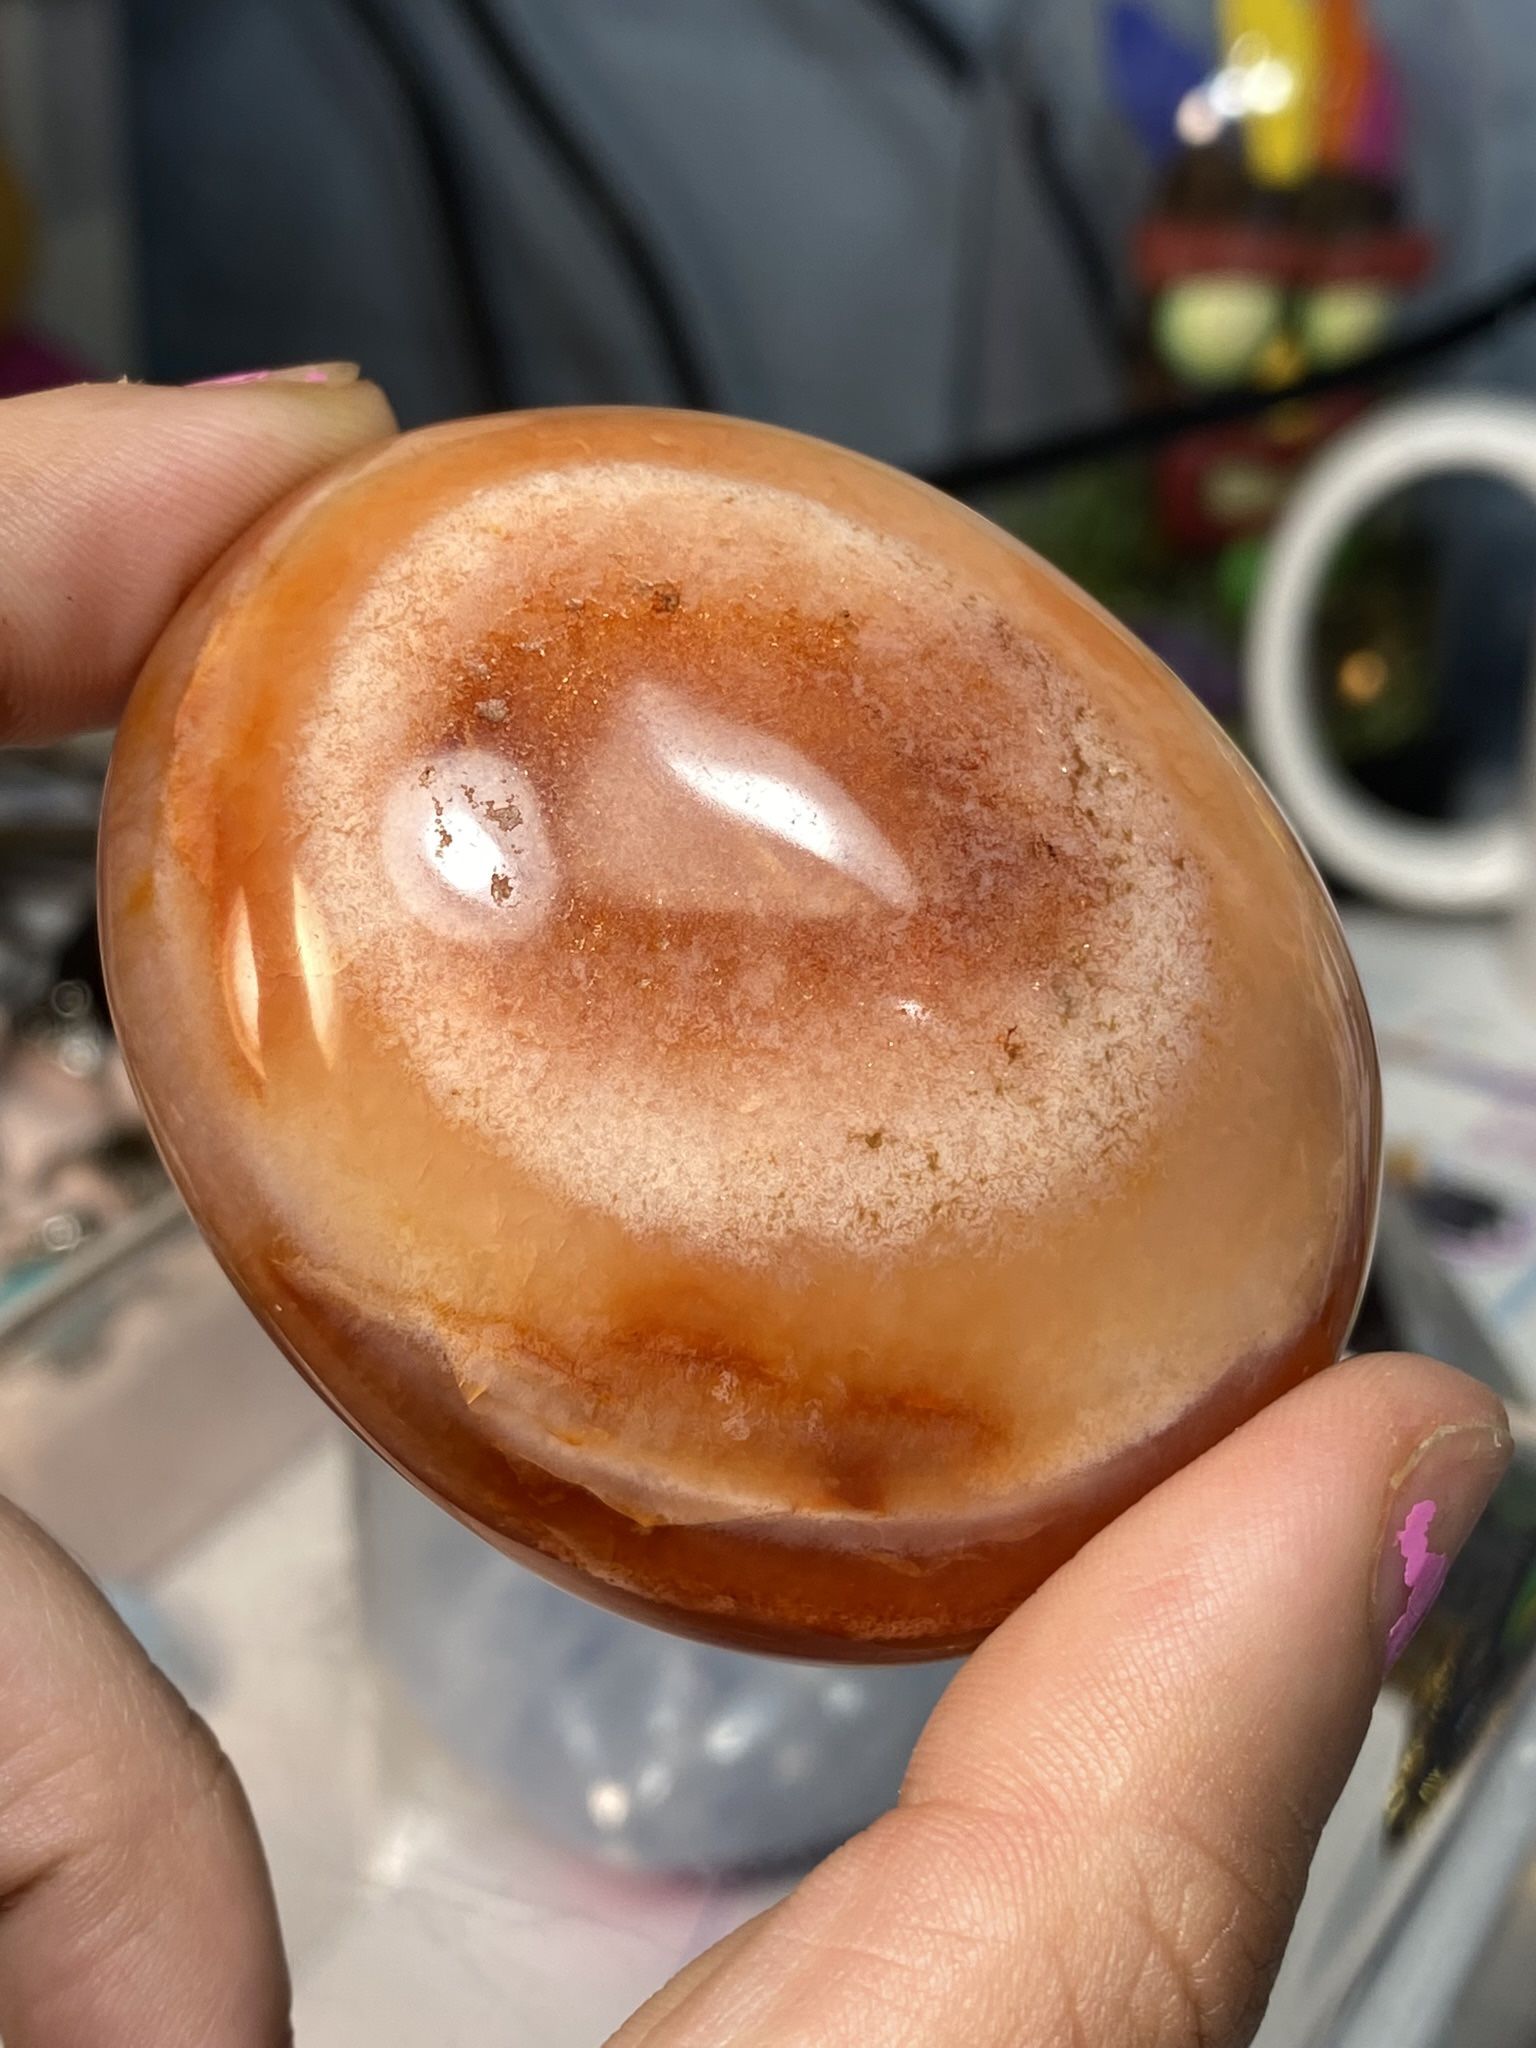 Carnelian Palm Stone with Healing & Calming Effects - AAA Grade High Energy Cornalina Worry Stone with Information Card - Reiki Crystal Used for Coura